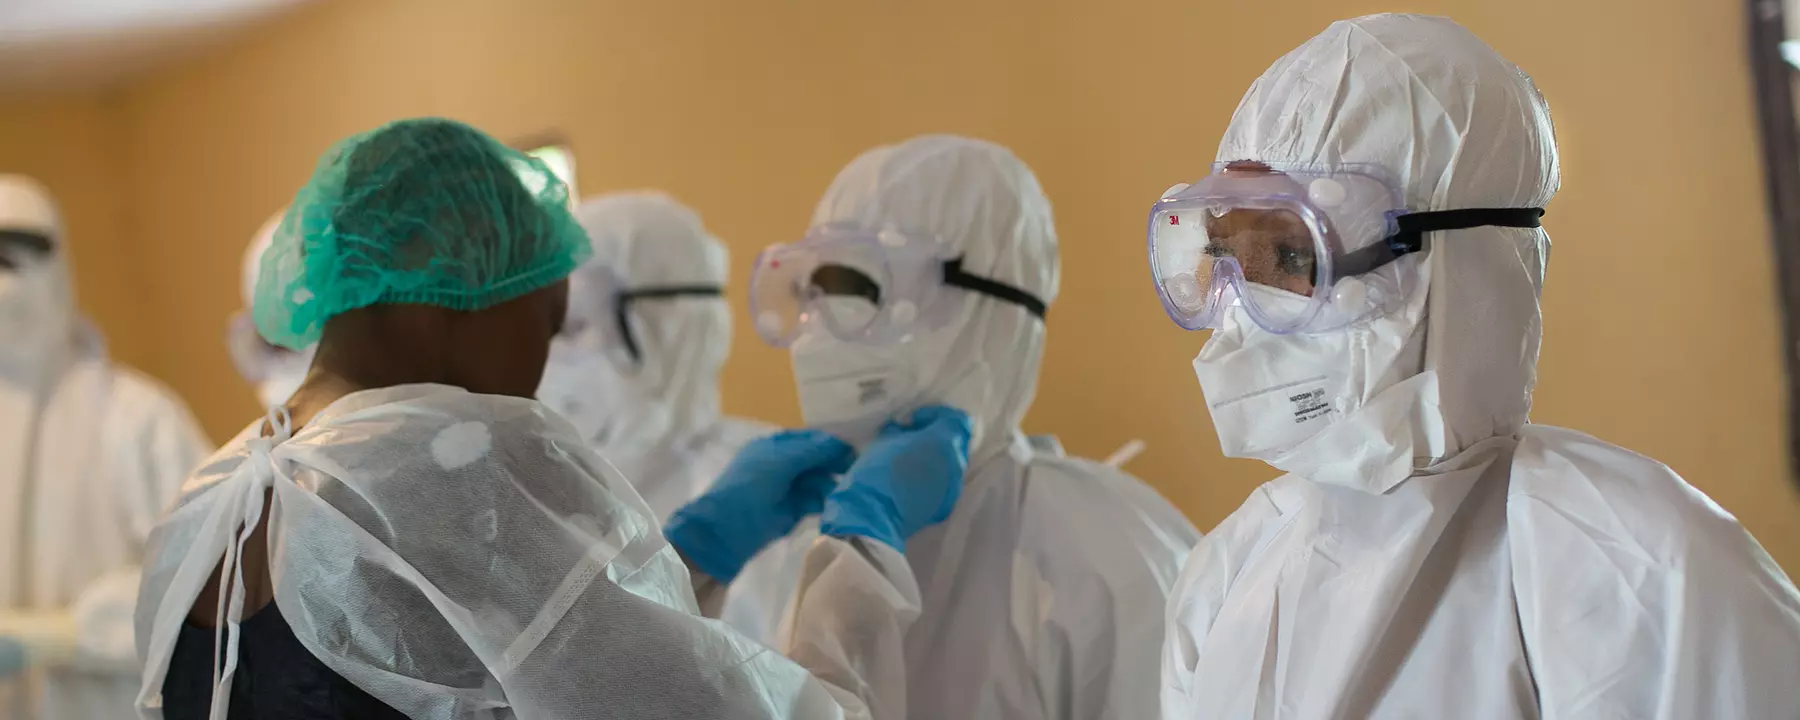 Building Resilience to Pandemic Threats